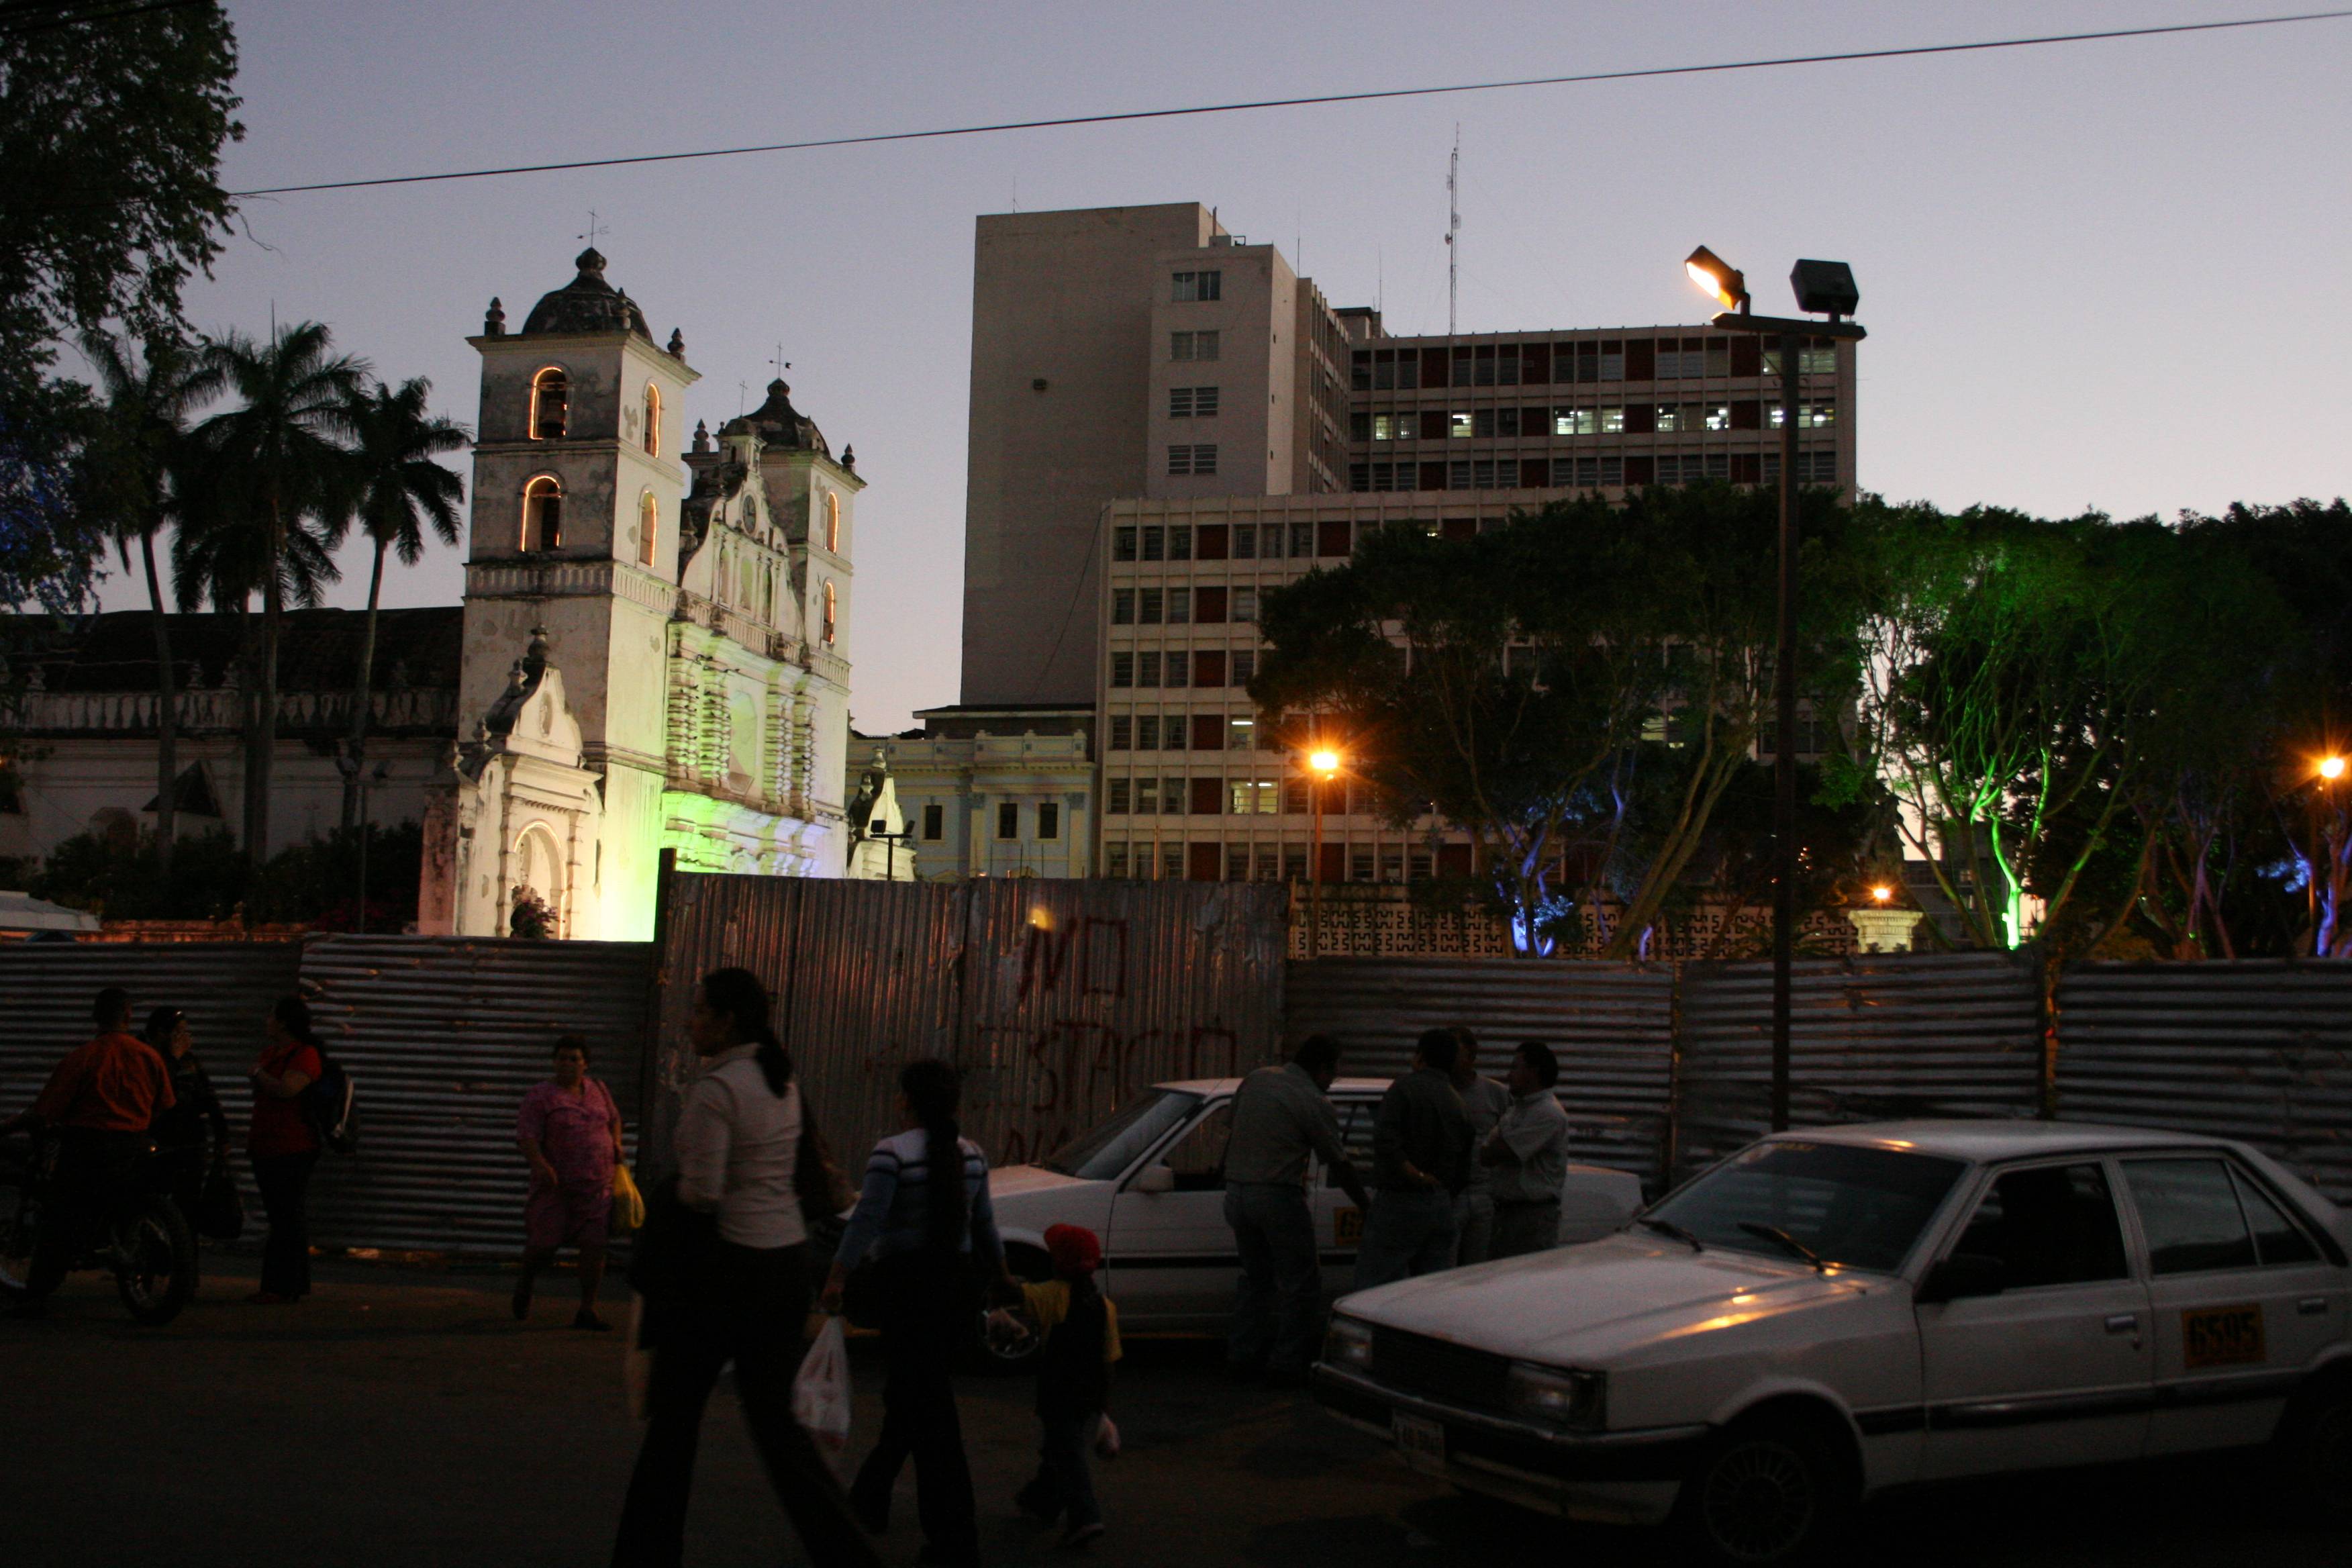 Parque Central fenced off for construction